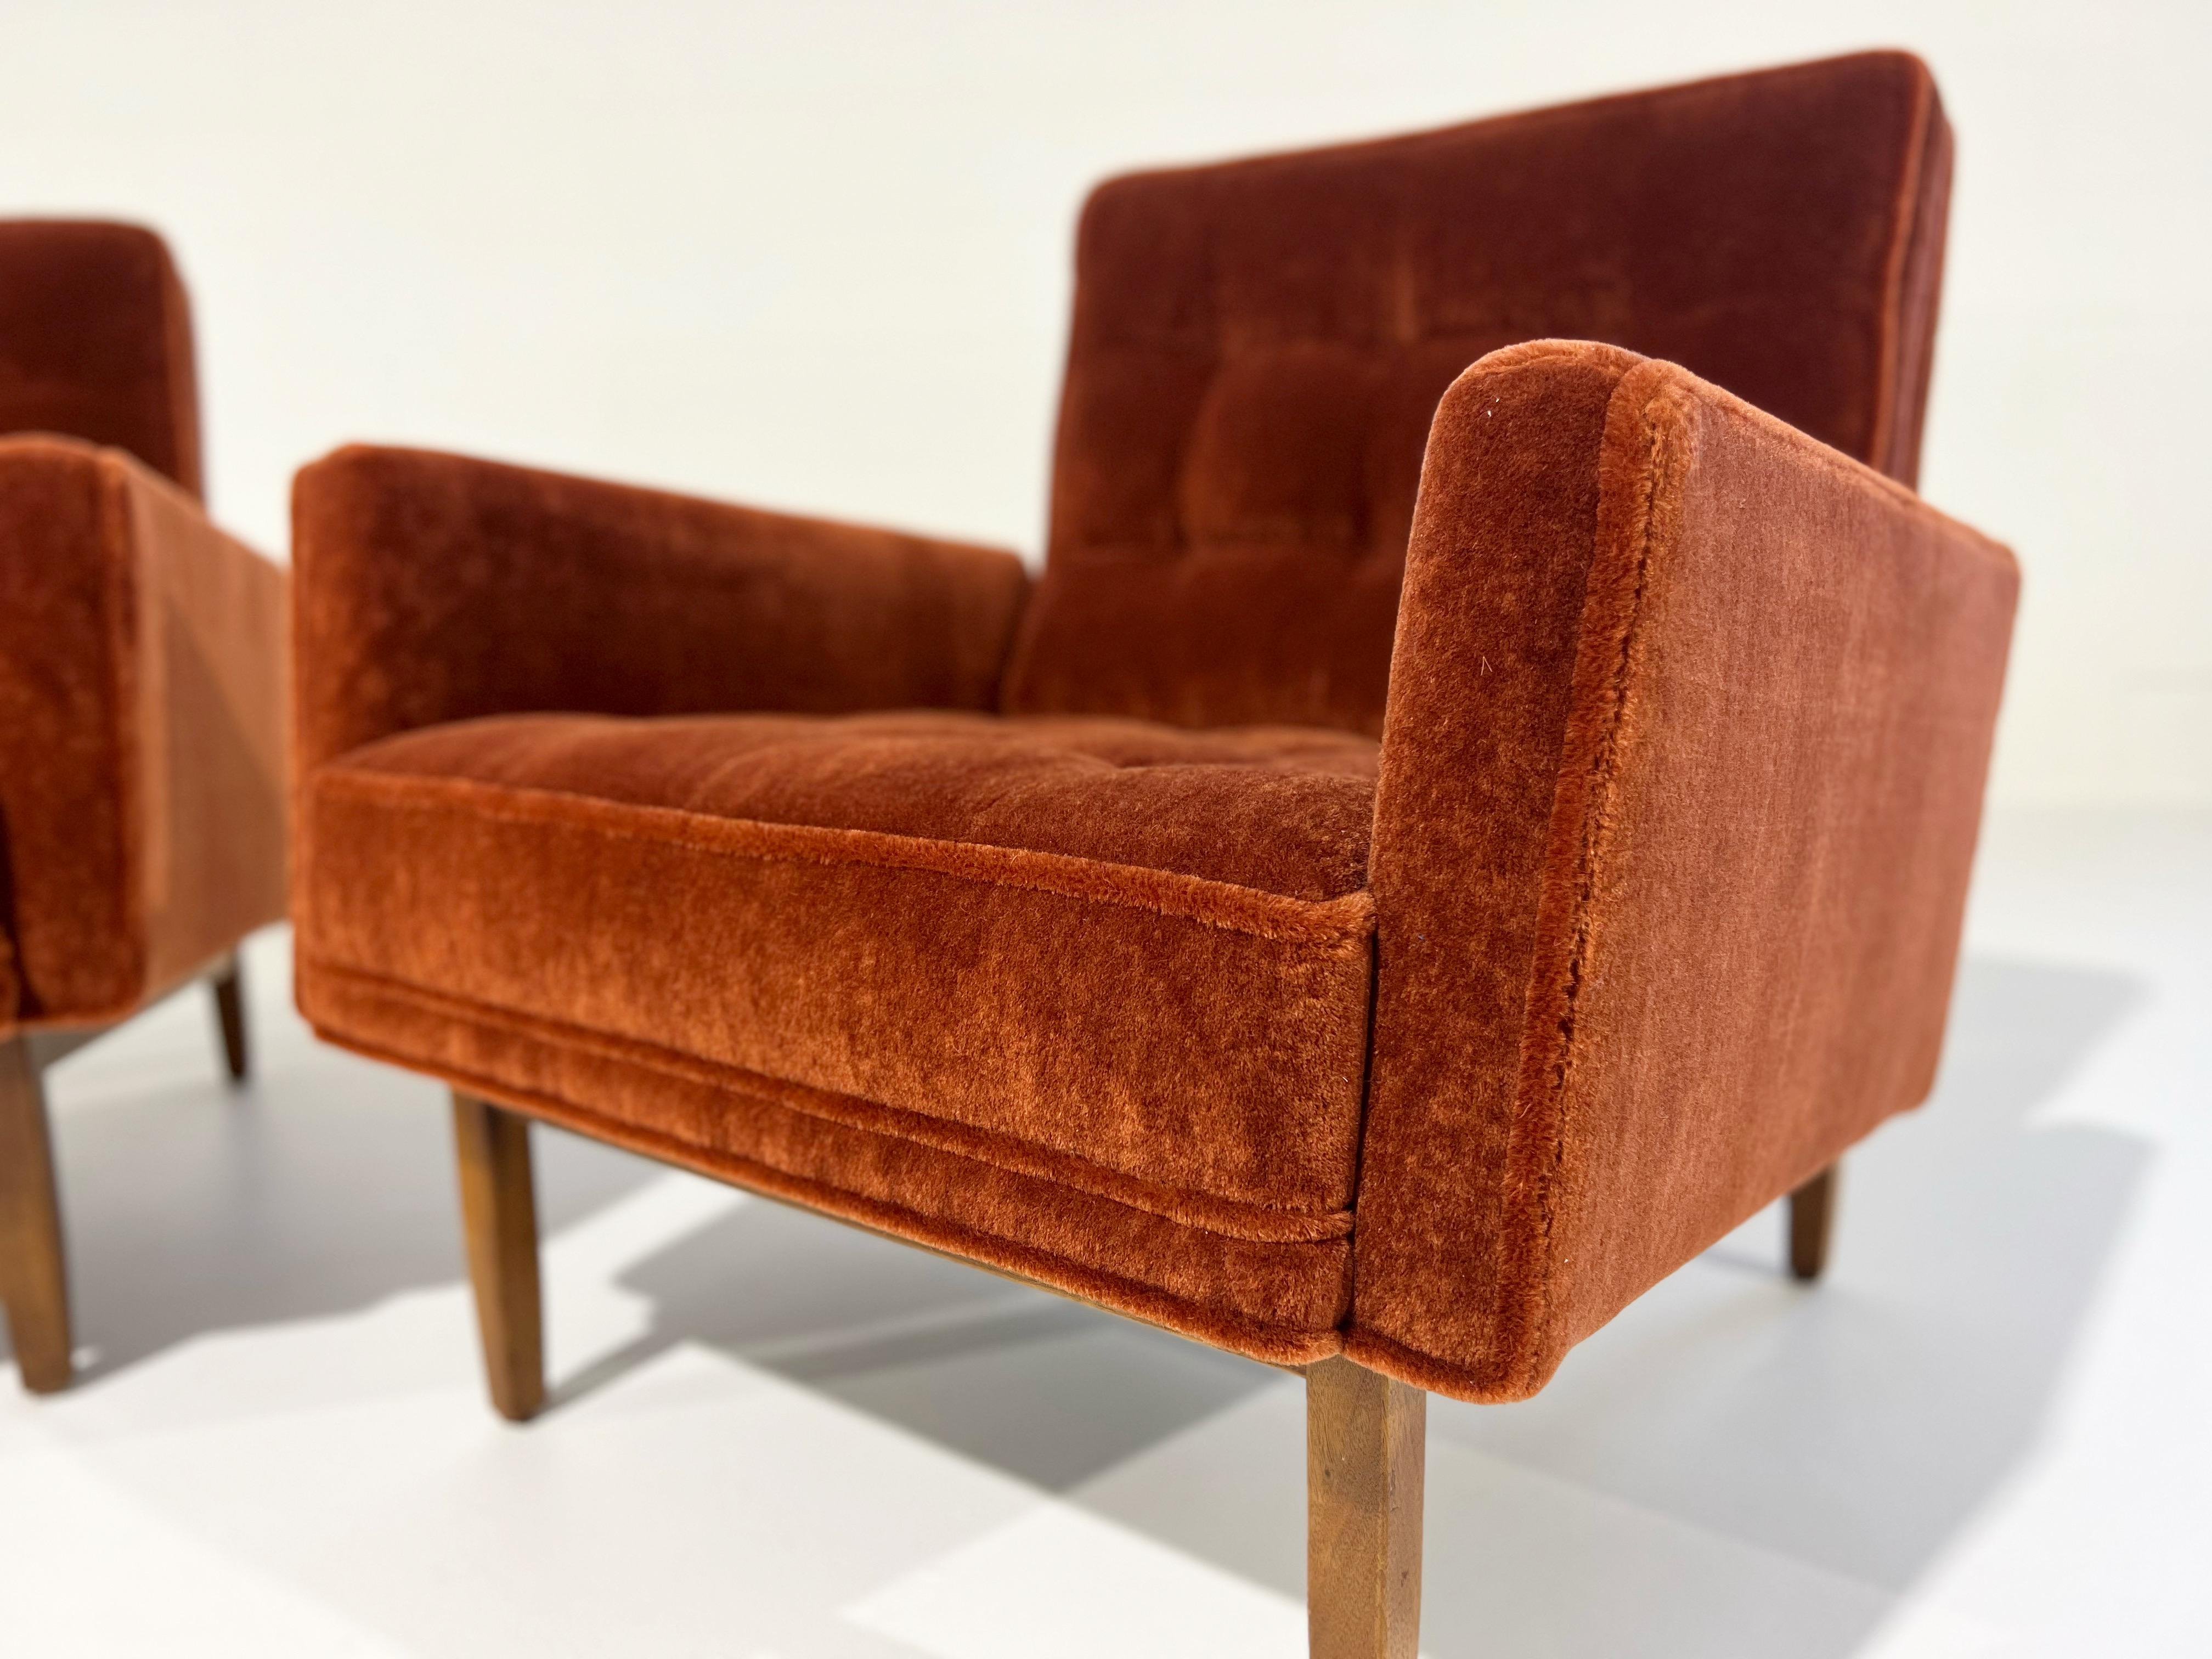 Vintage Restored Florence Knoll Armchairs in Pierre Frey Teddy Mohair For Sale 2